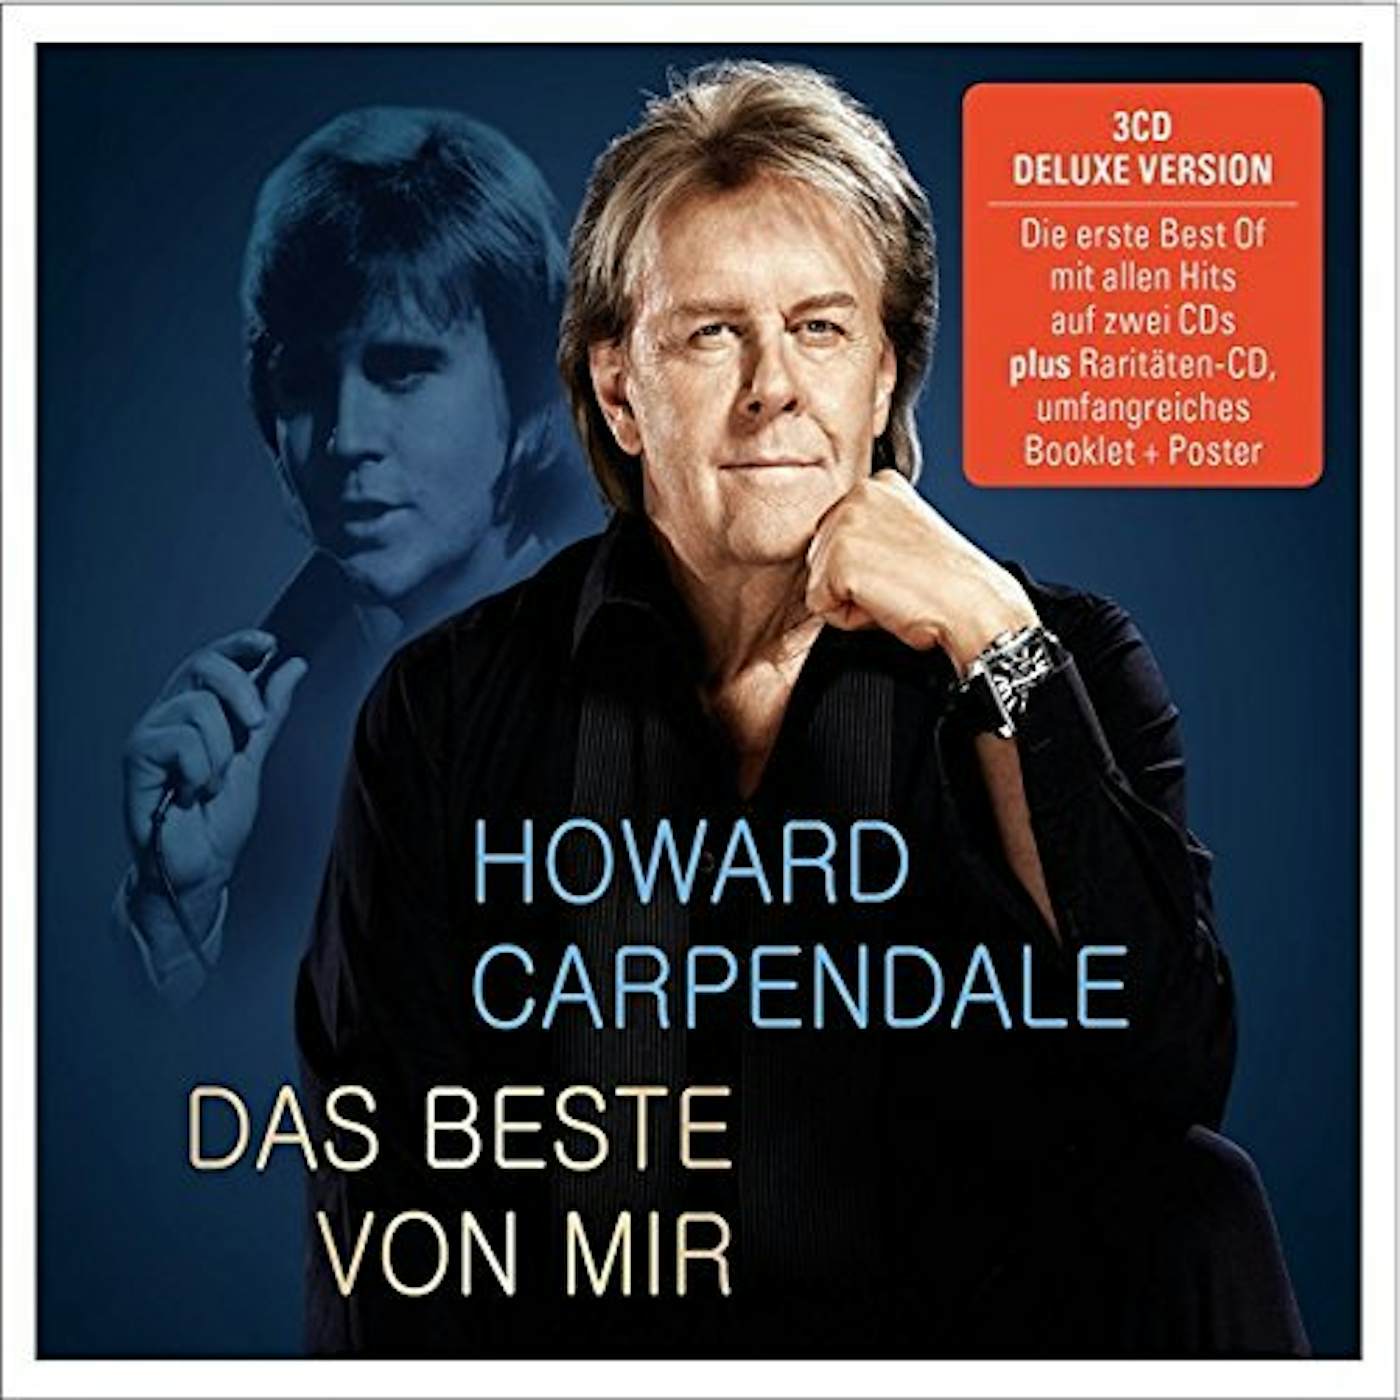 Howard Carpendale BEST OF 2016: DELUXE EDITION CD